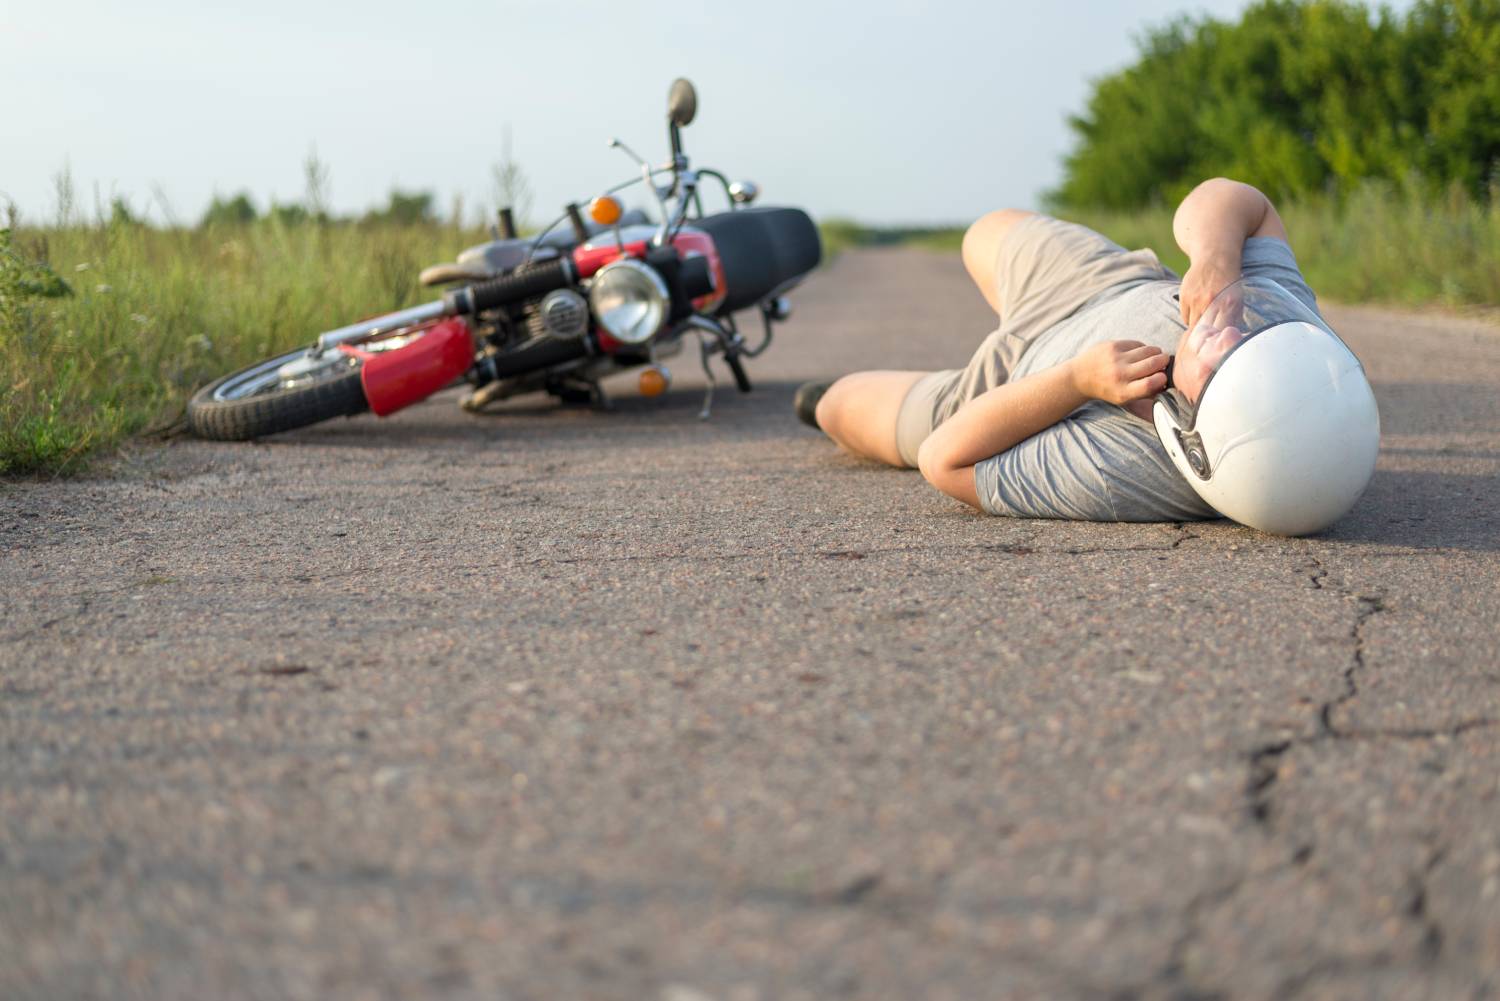 Man in Motocycle accident